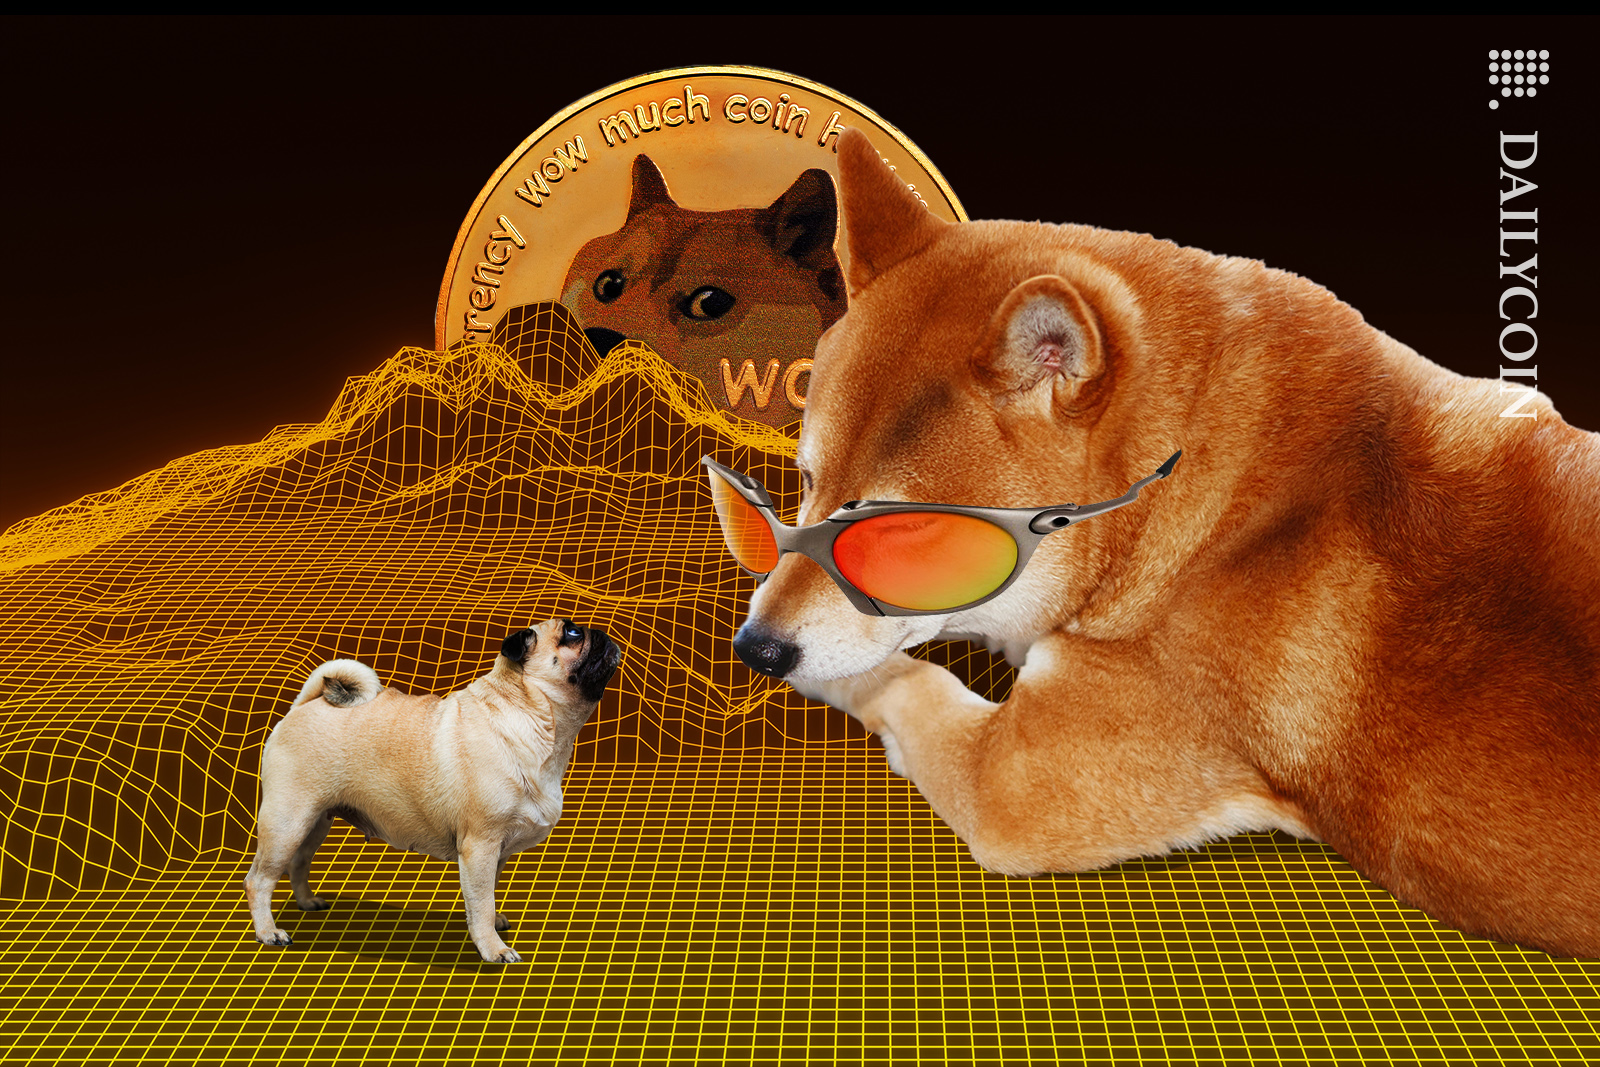 Doge talking about pressure for his coin with his pal the pug.